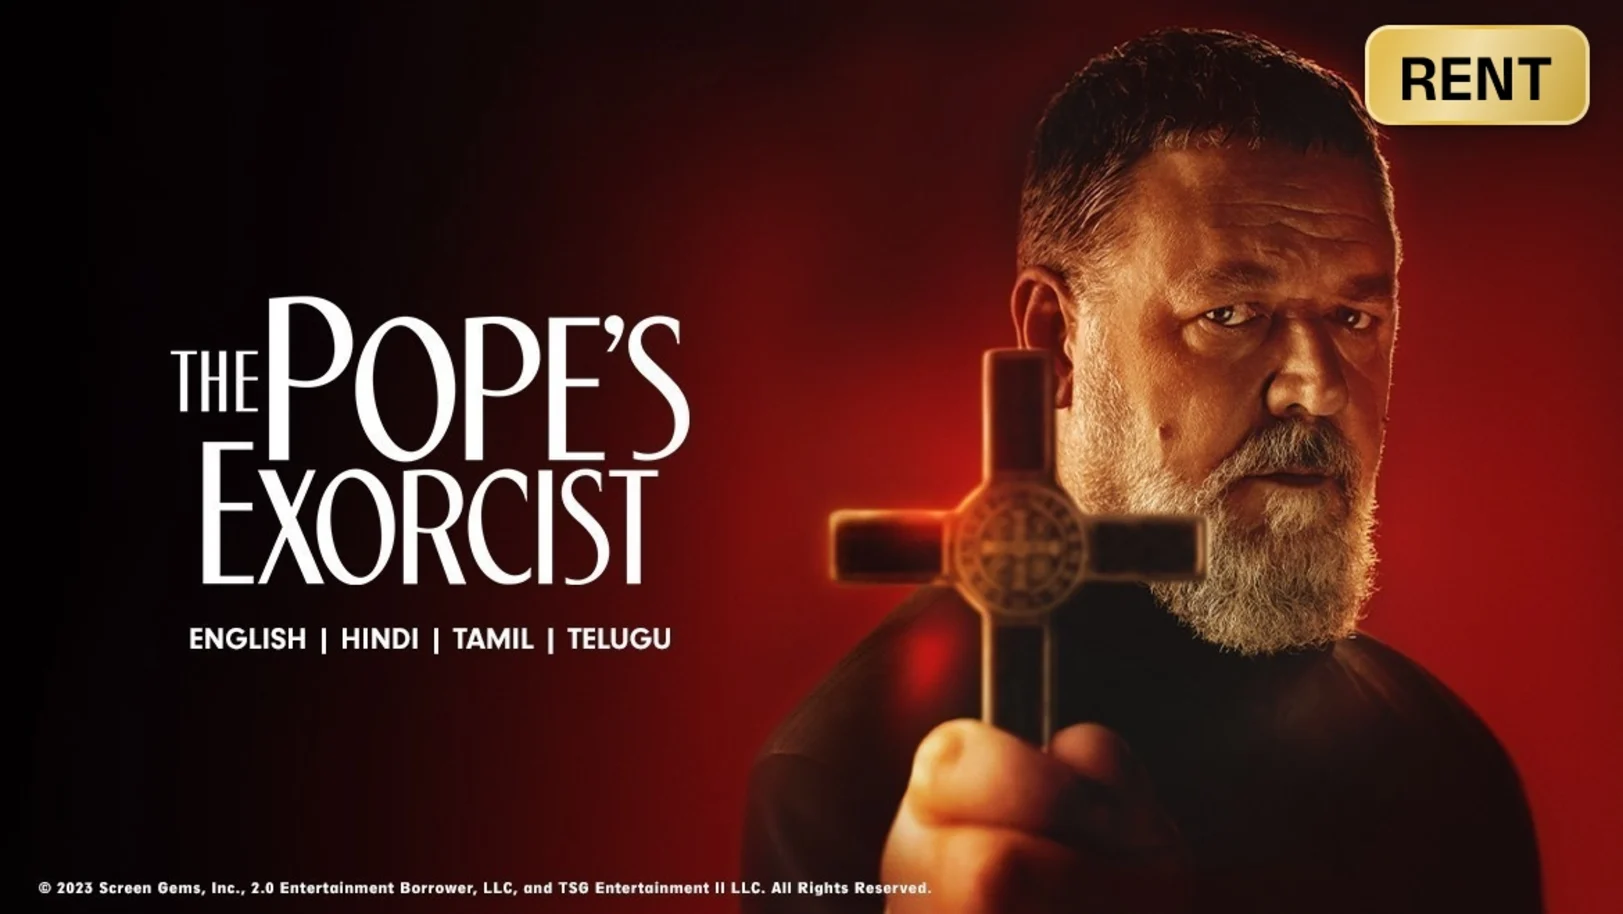 The Pope's Exorcist Movie